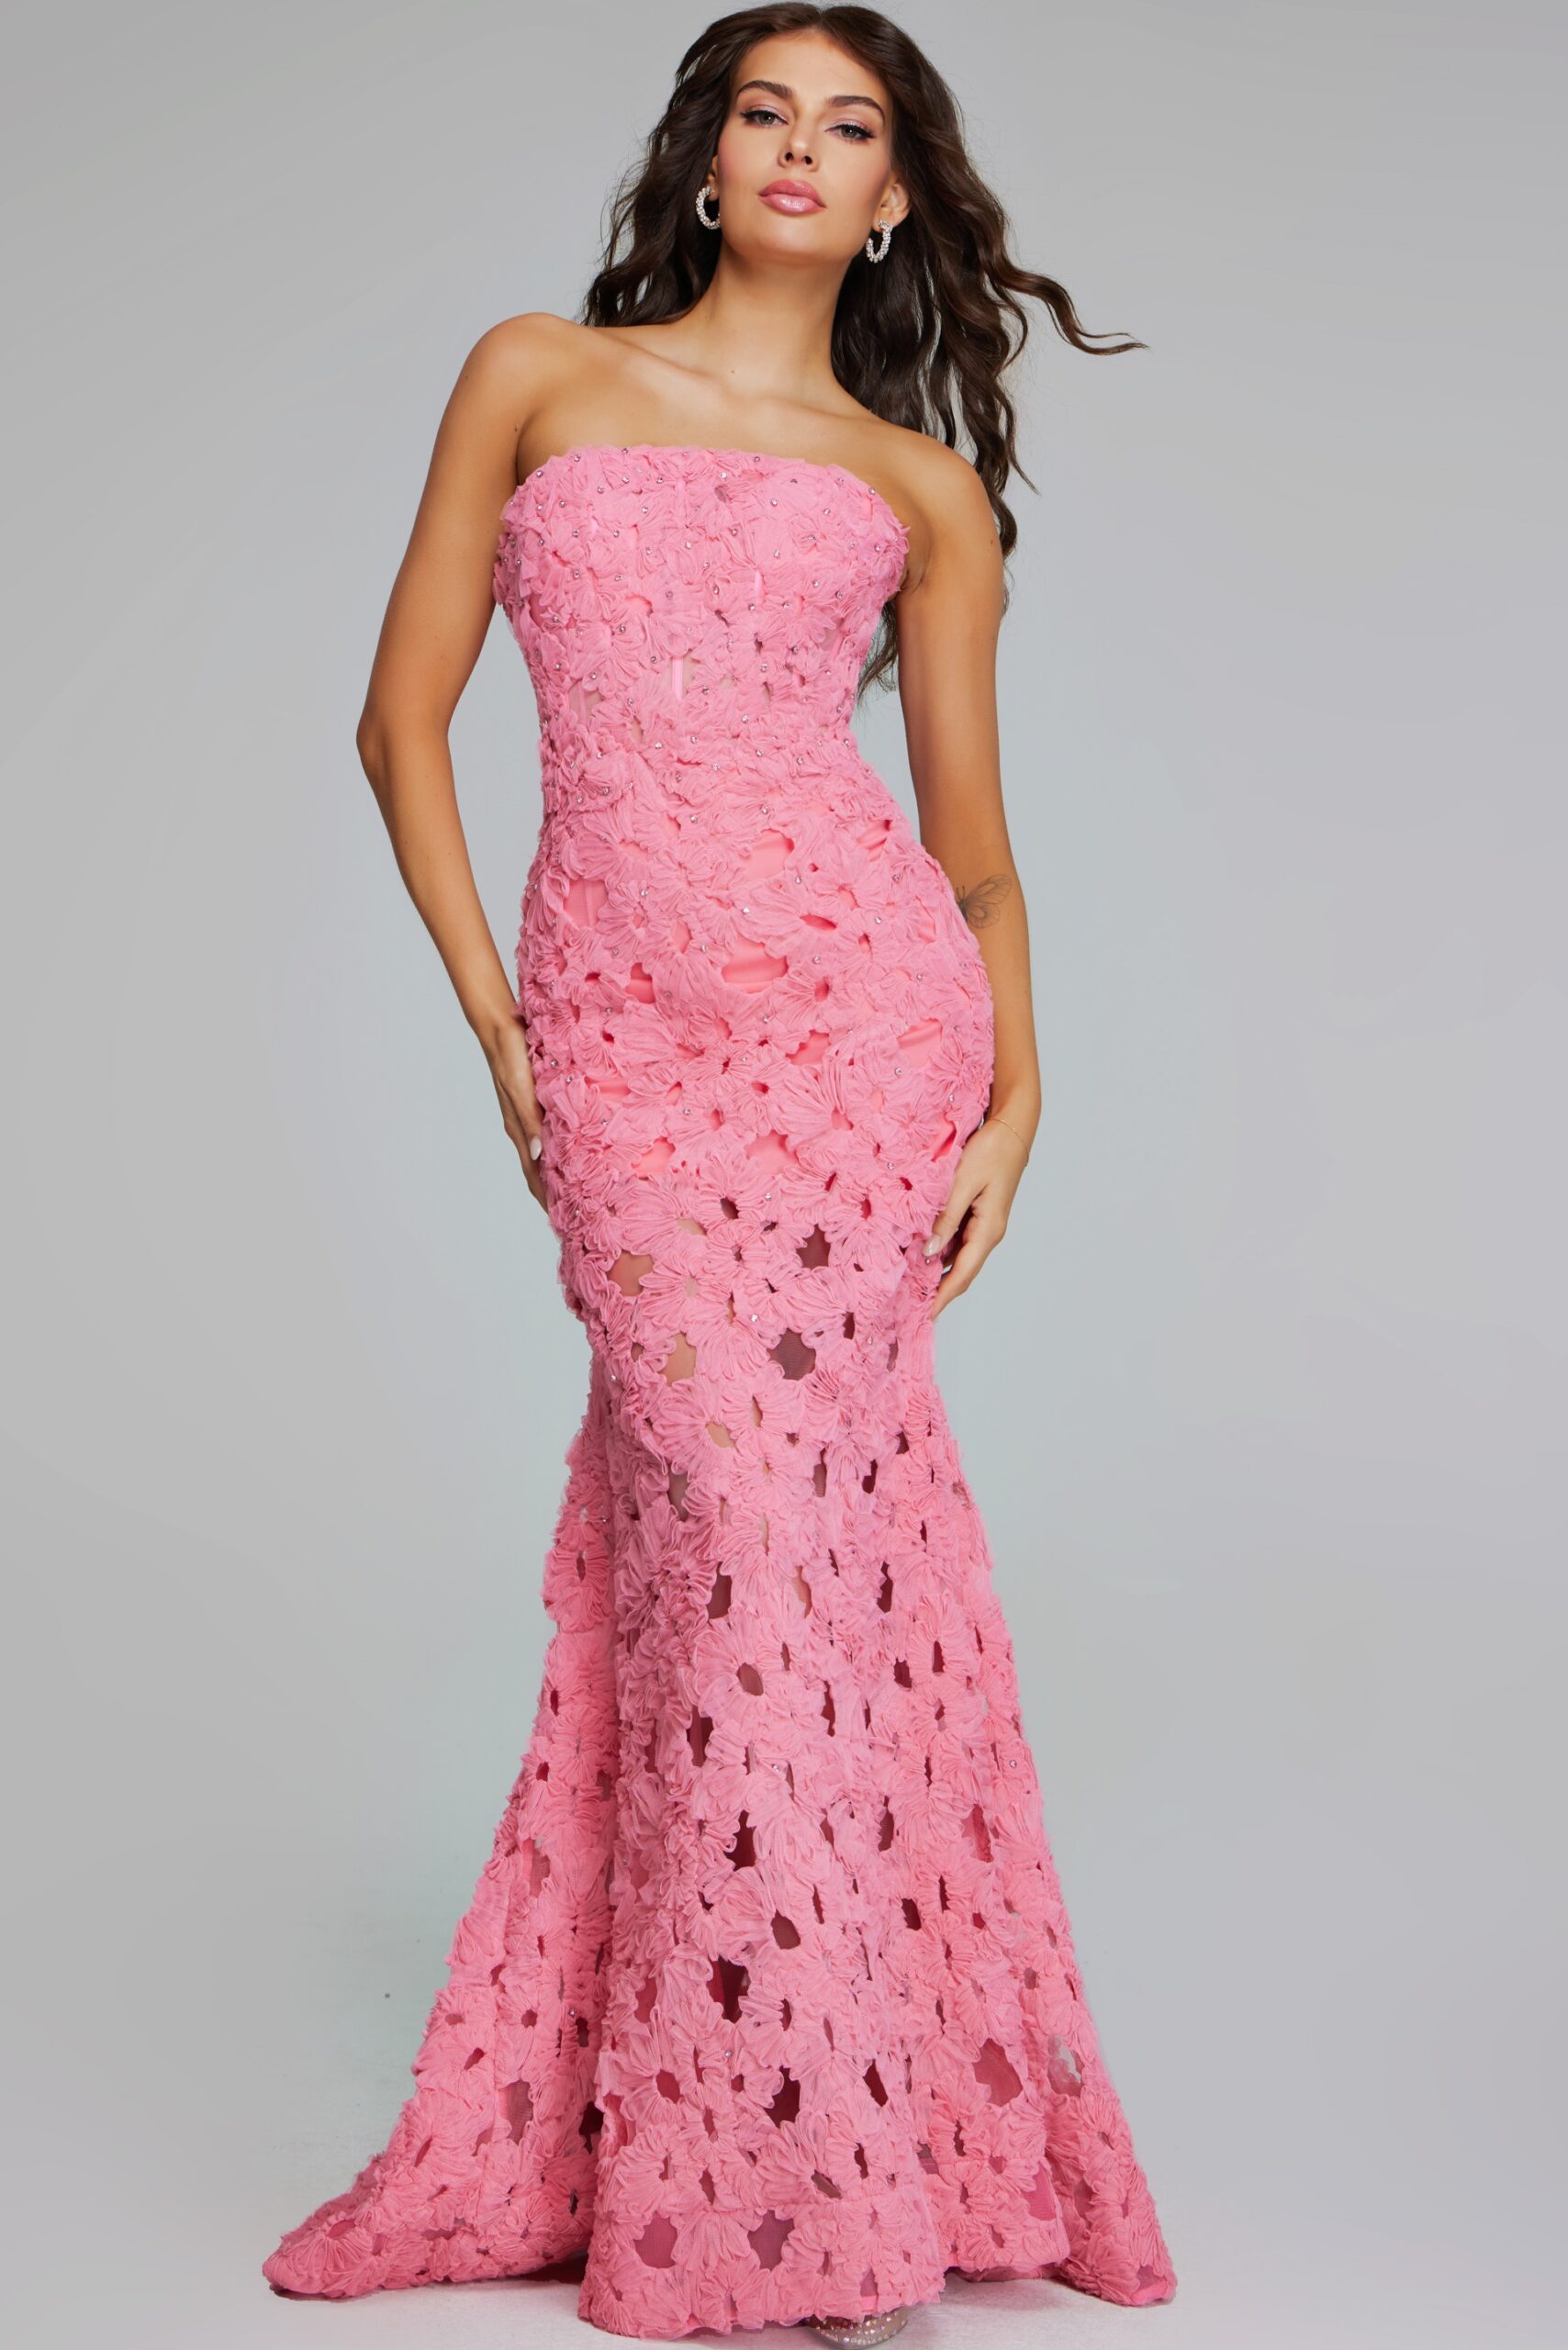 Model wearing Pink Strapless Gown with Floral Lace Detailing 40744